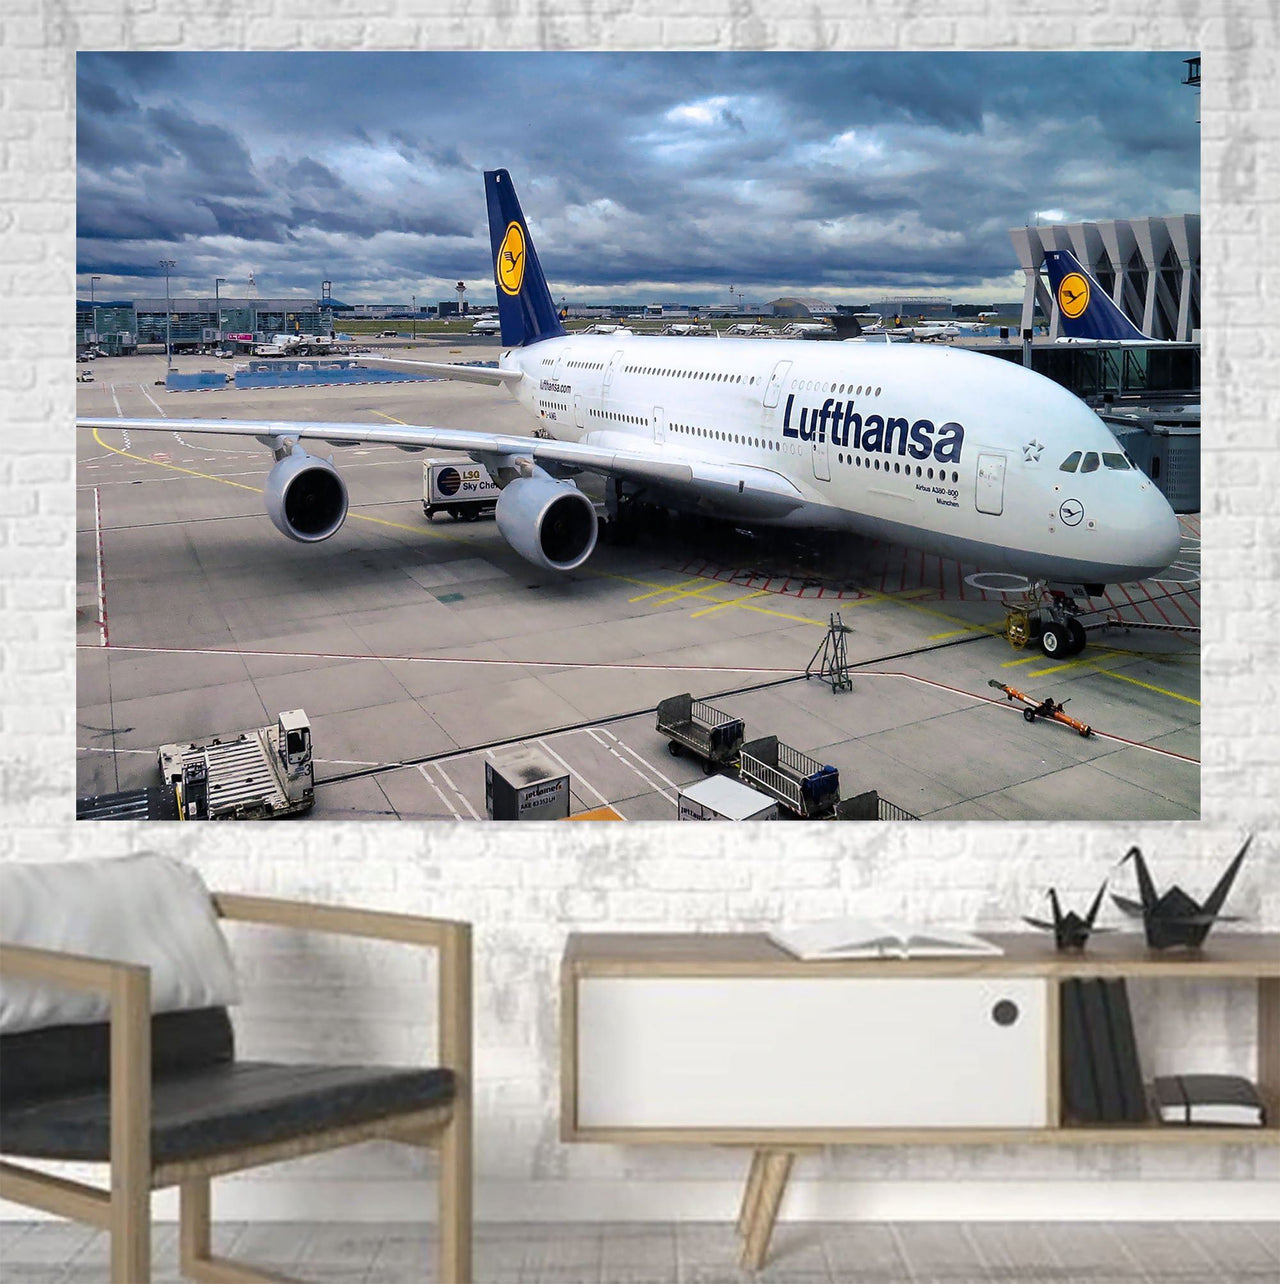 Lufthansa's A380 At the Gate Printed Canvas Posters (1 Piece) Aviation Shop 